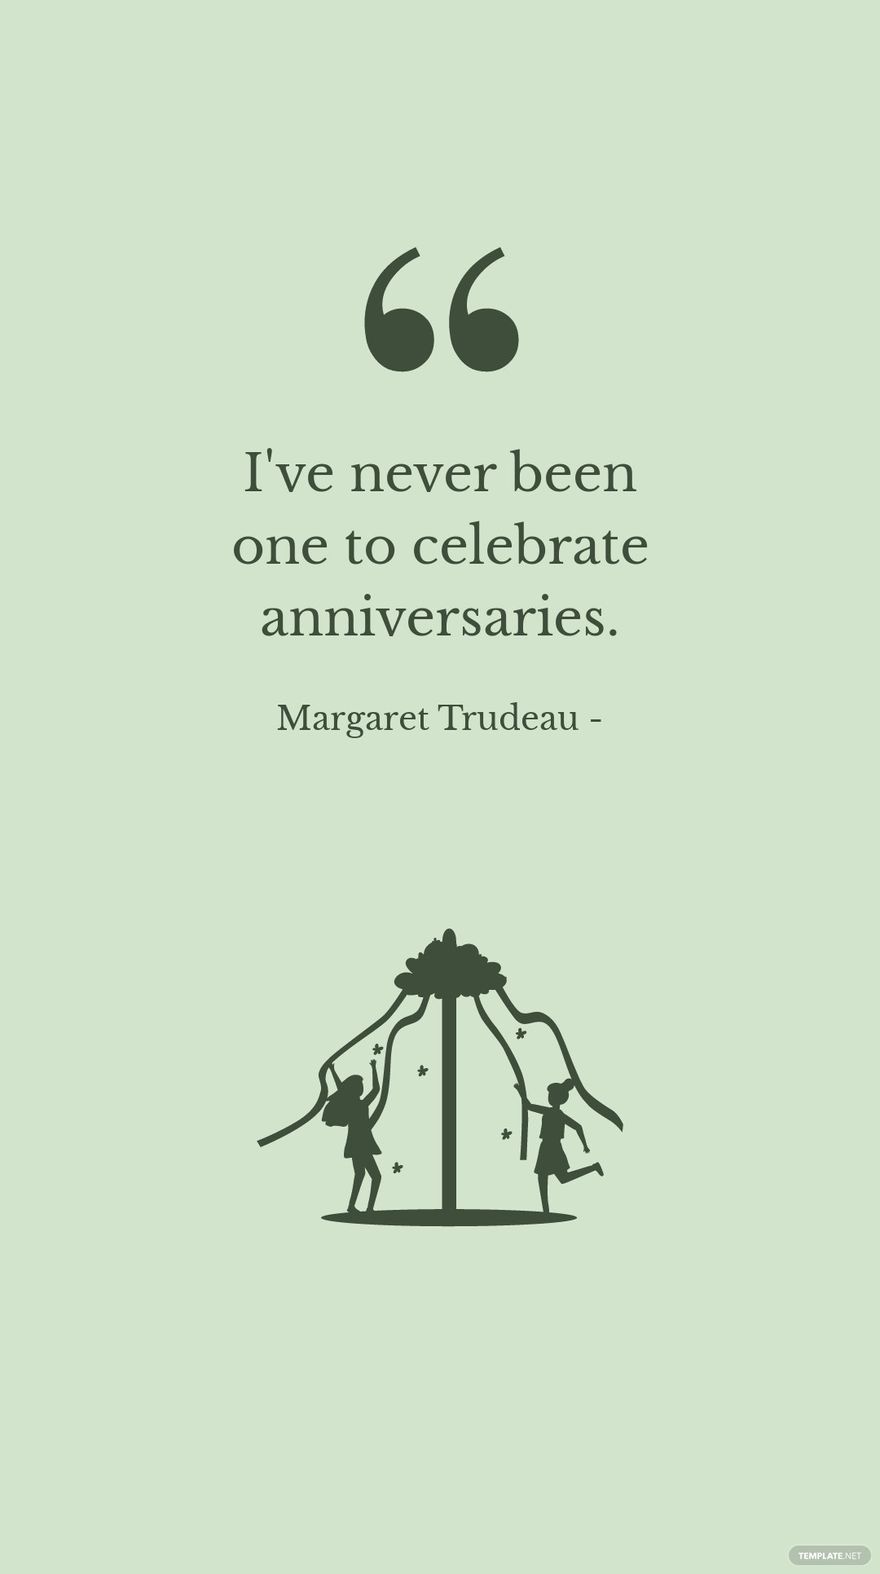 Margaret Trudeau - I've never been one to celebrate anniversaries.